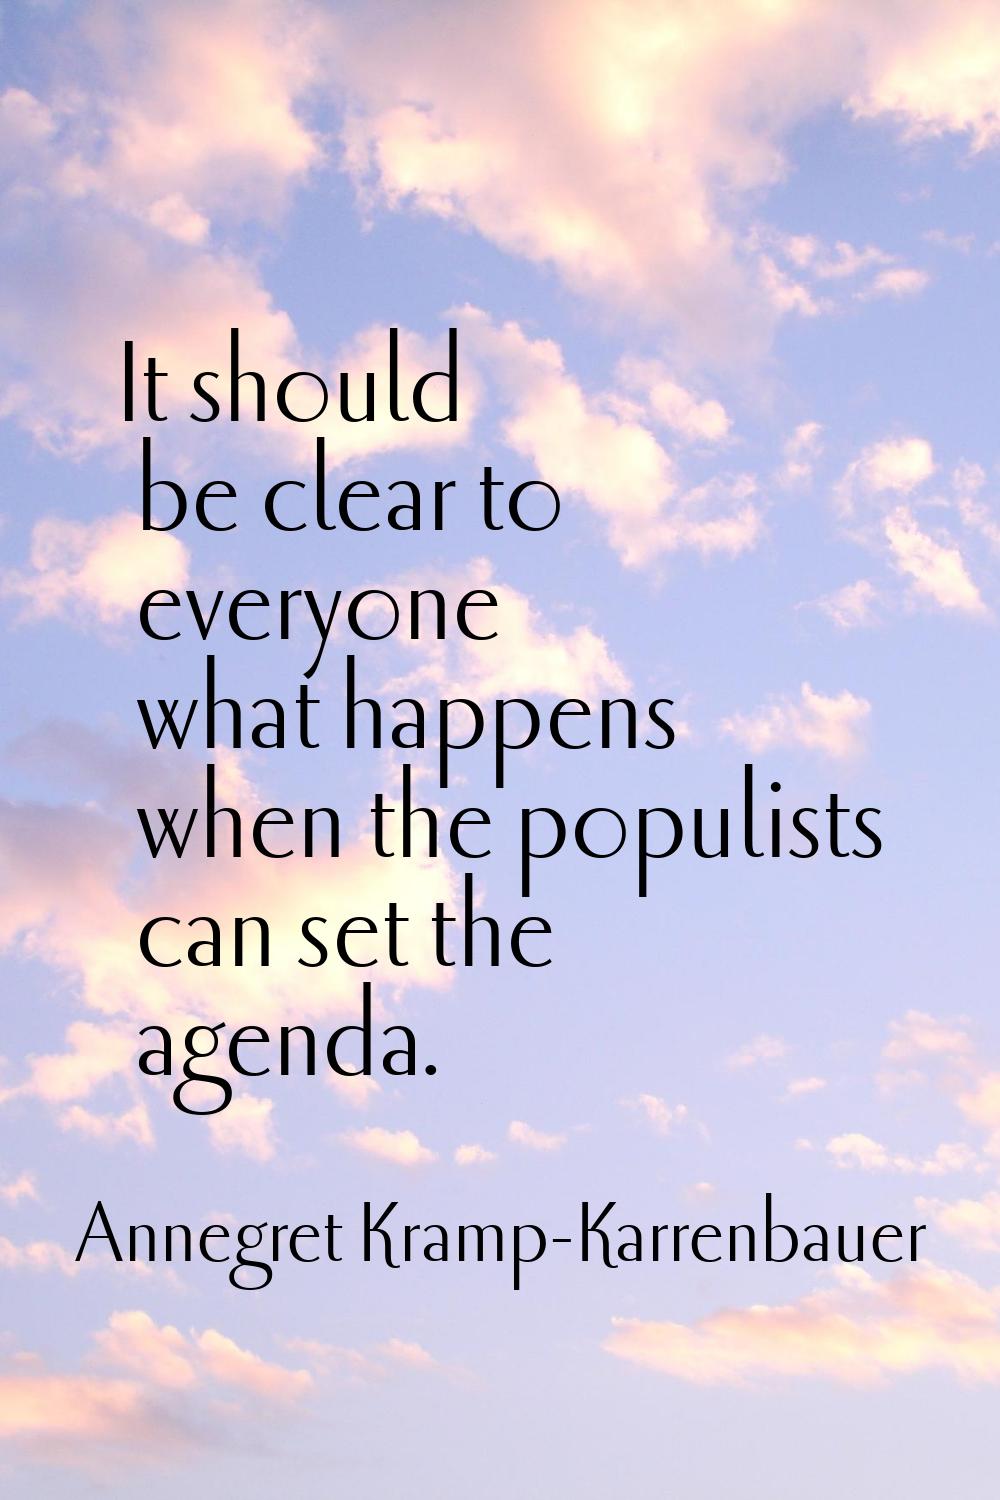 It should be clear to everyone what happens when the populists can set the agenda.